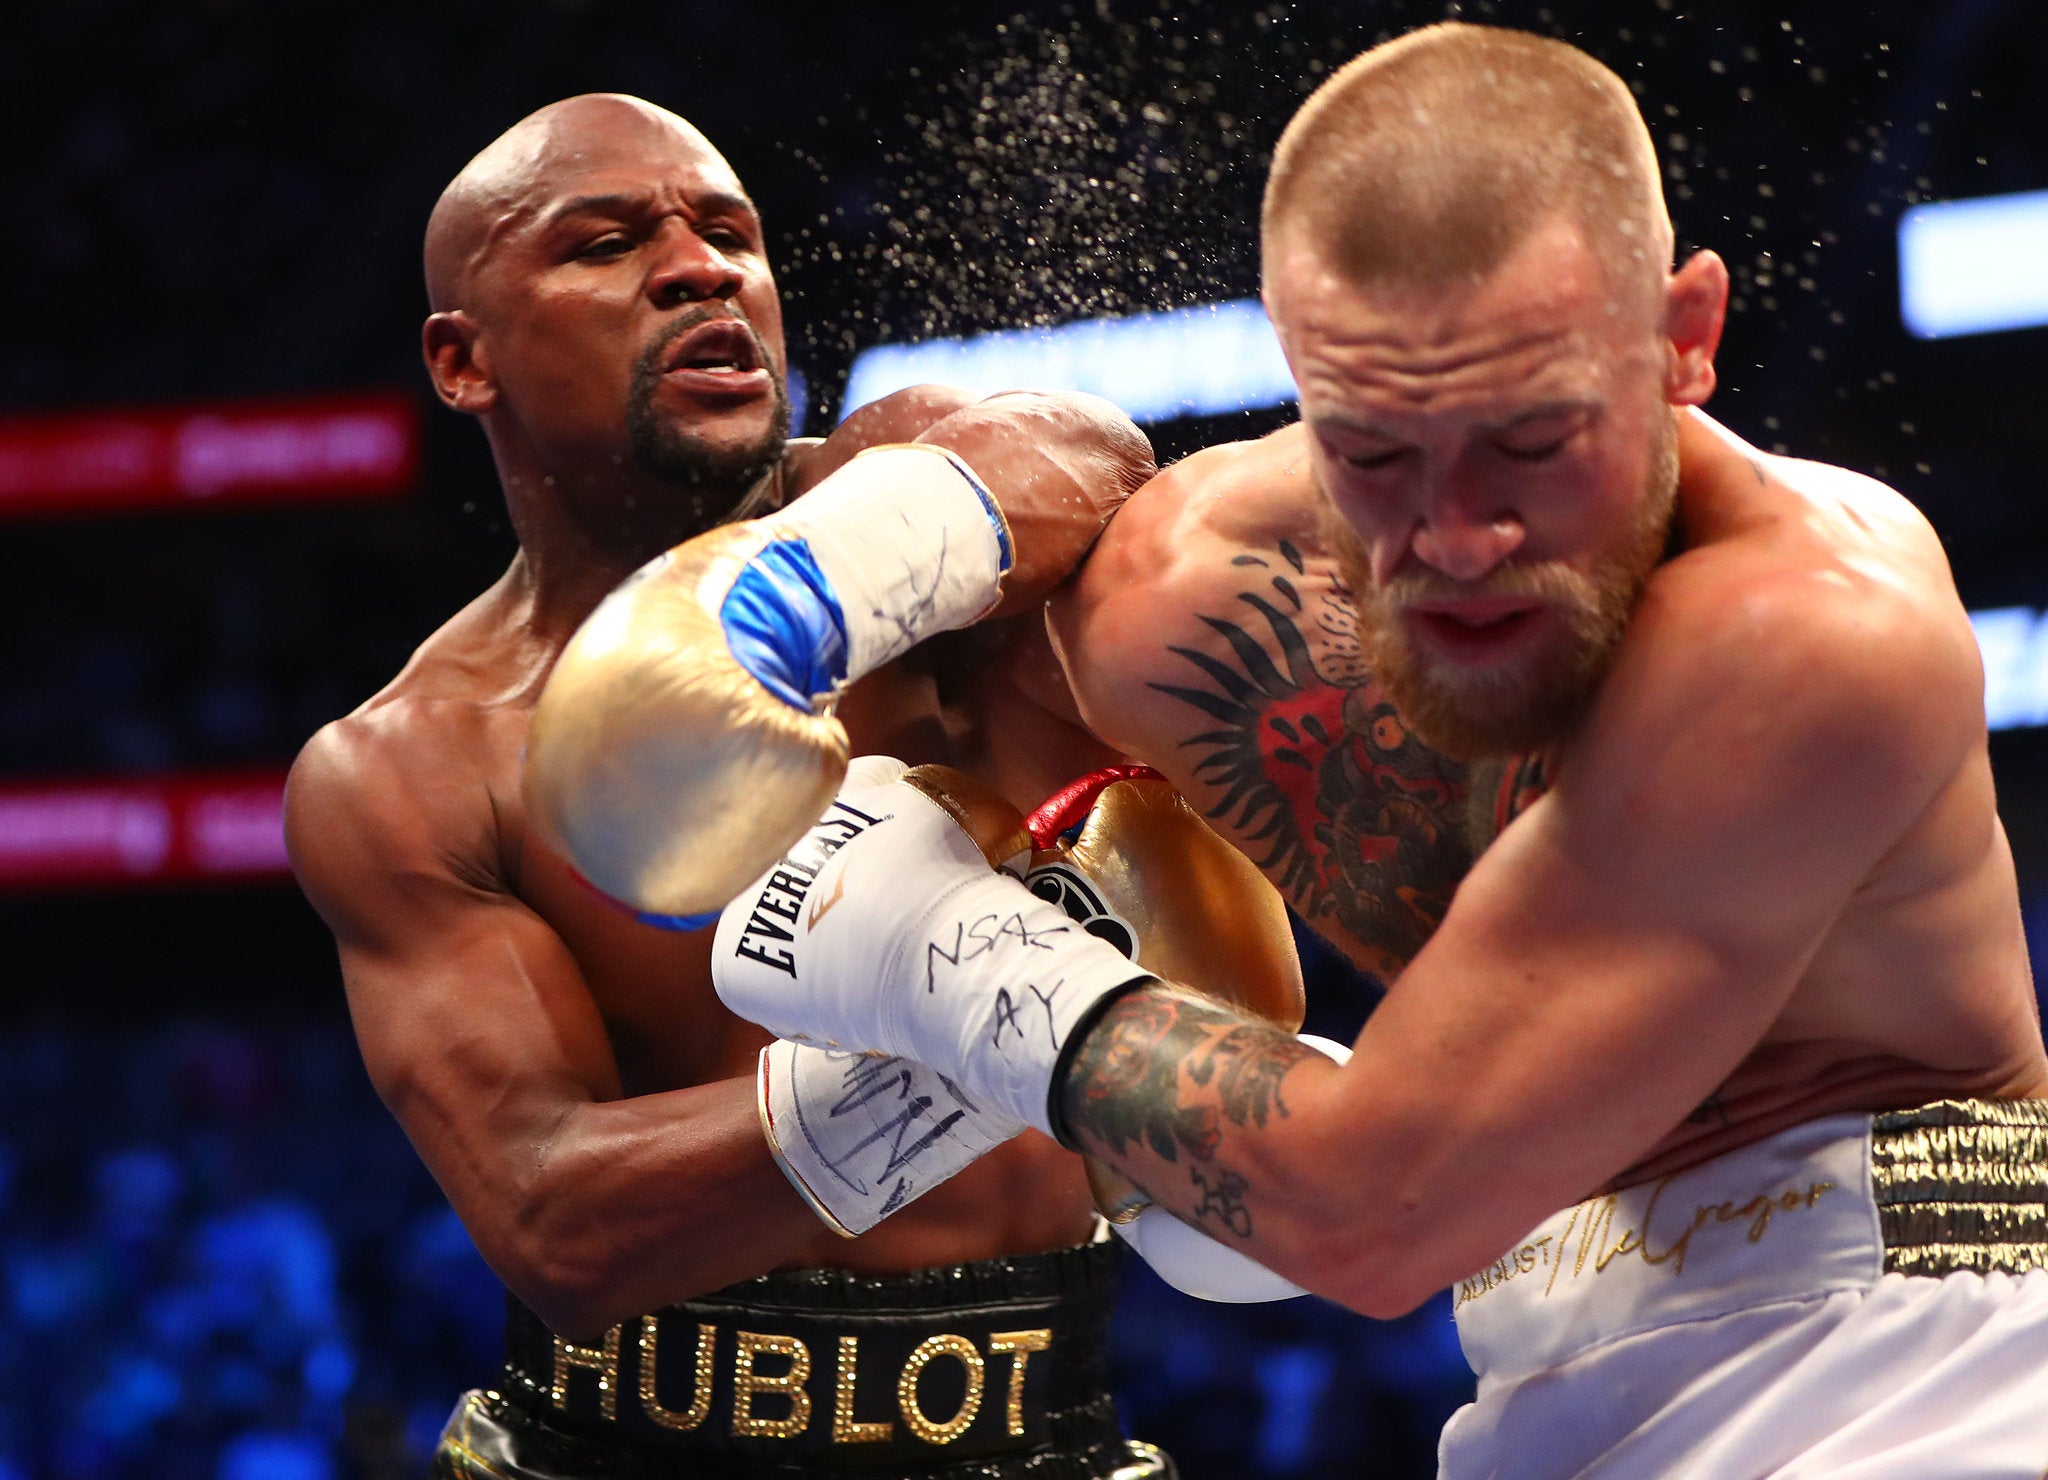 Floyd Mayweather Remains Undefeated. The Champ is now 50-0!